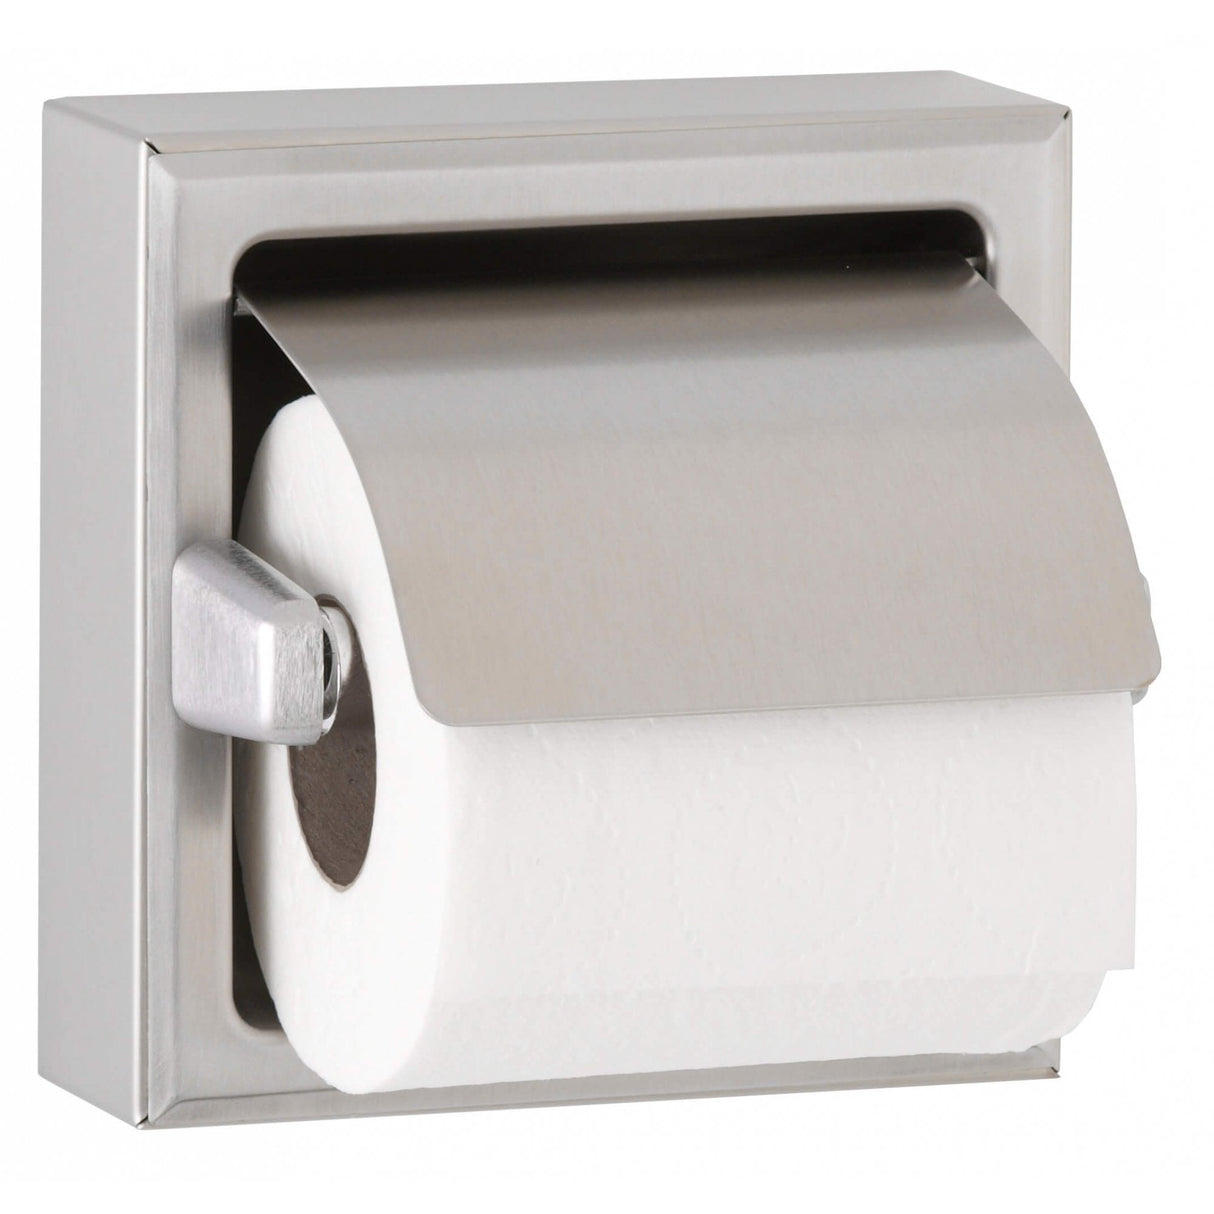 B-6699 / B-66997 Surface Mounted Toilet Roll Holder with Lid